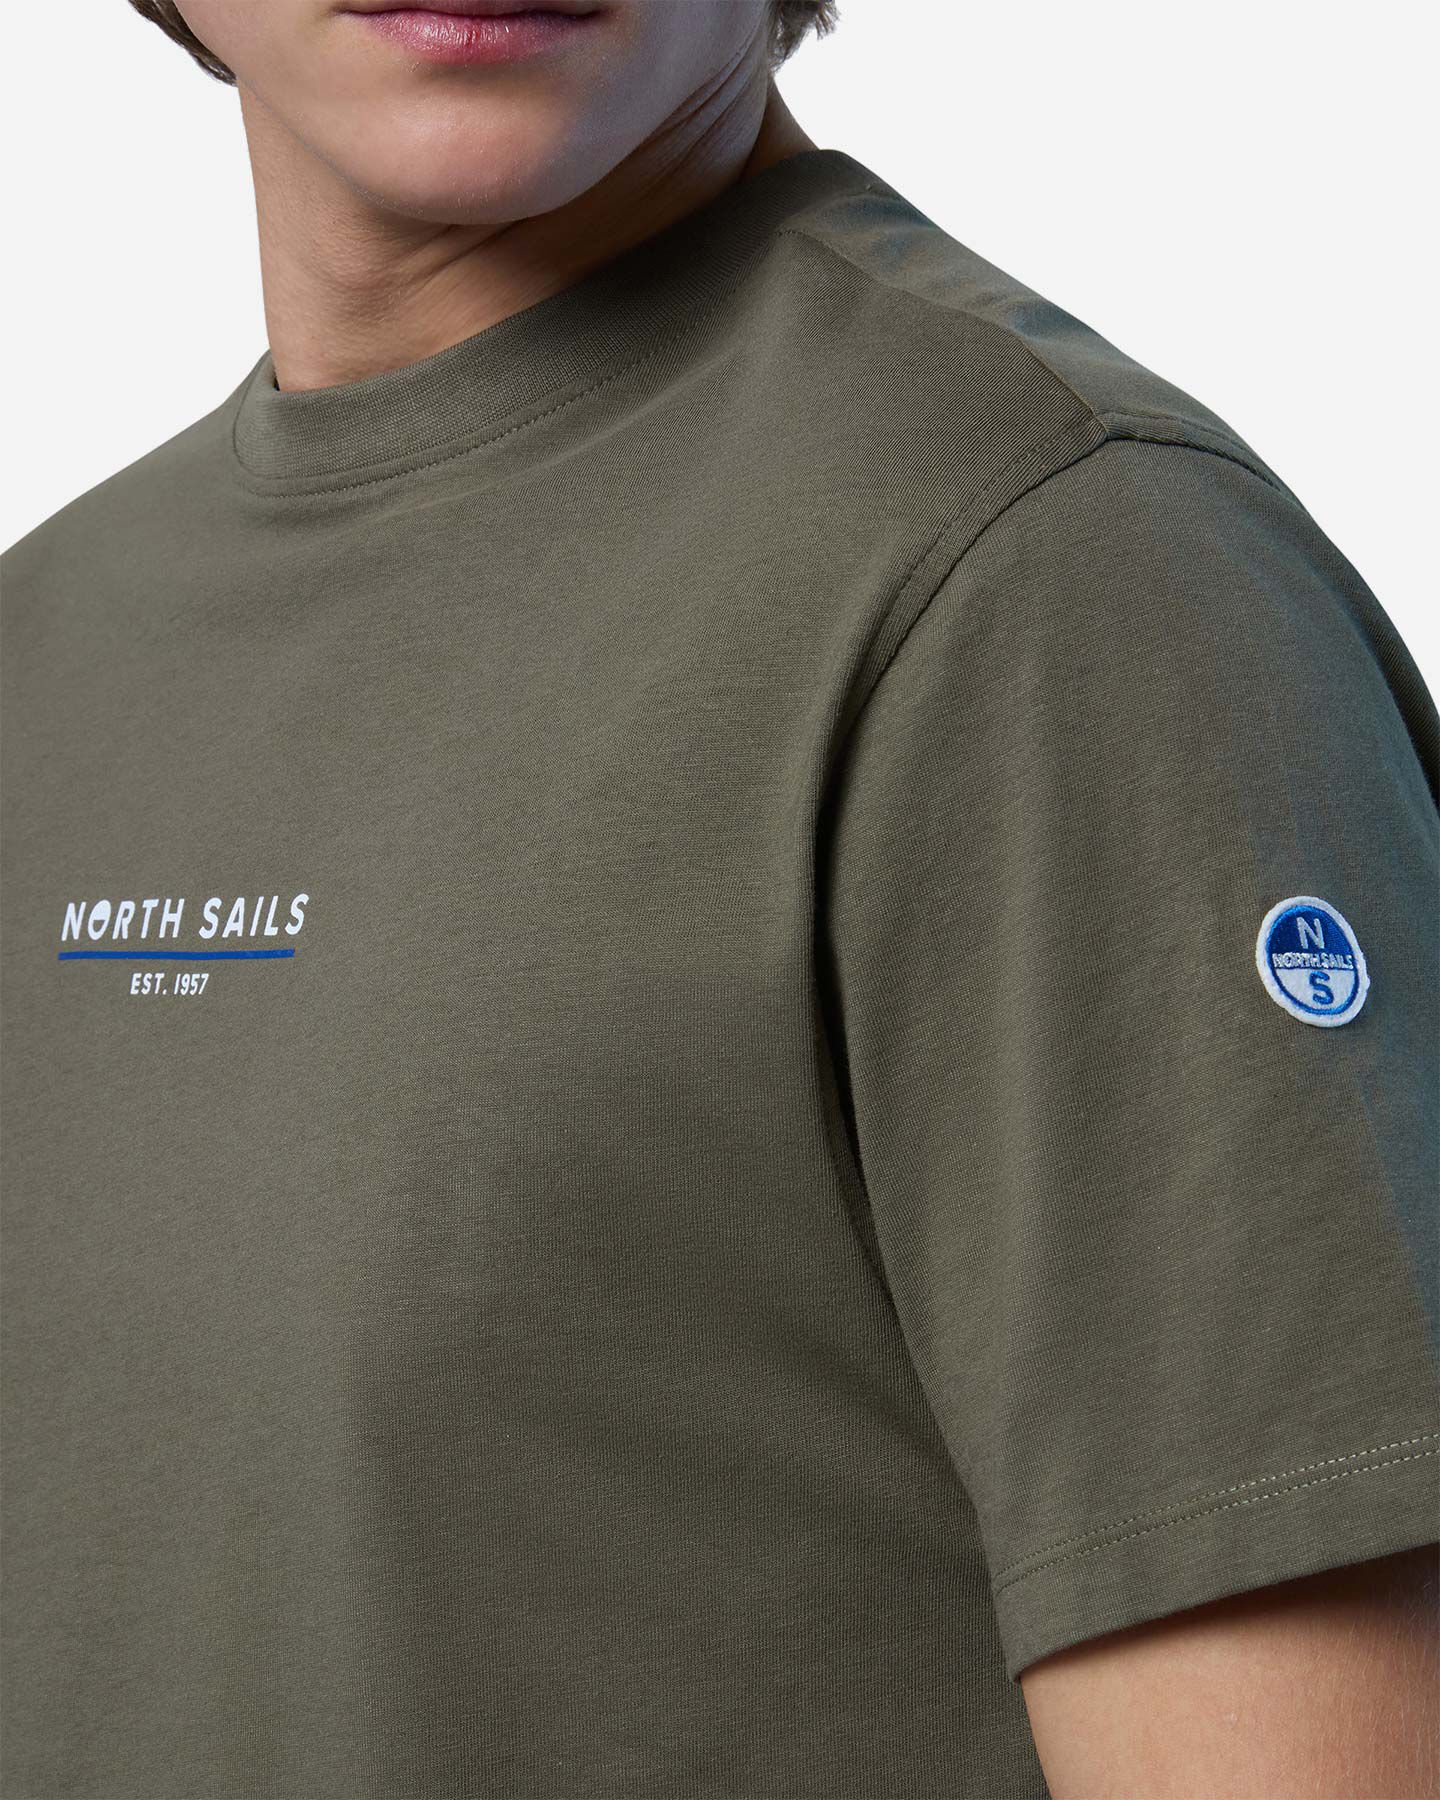  T-Shirt NORTH SAILS NEW LOGO M S5684008|0441|S scatto 4